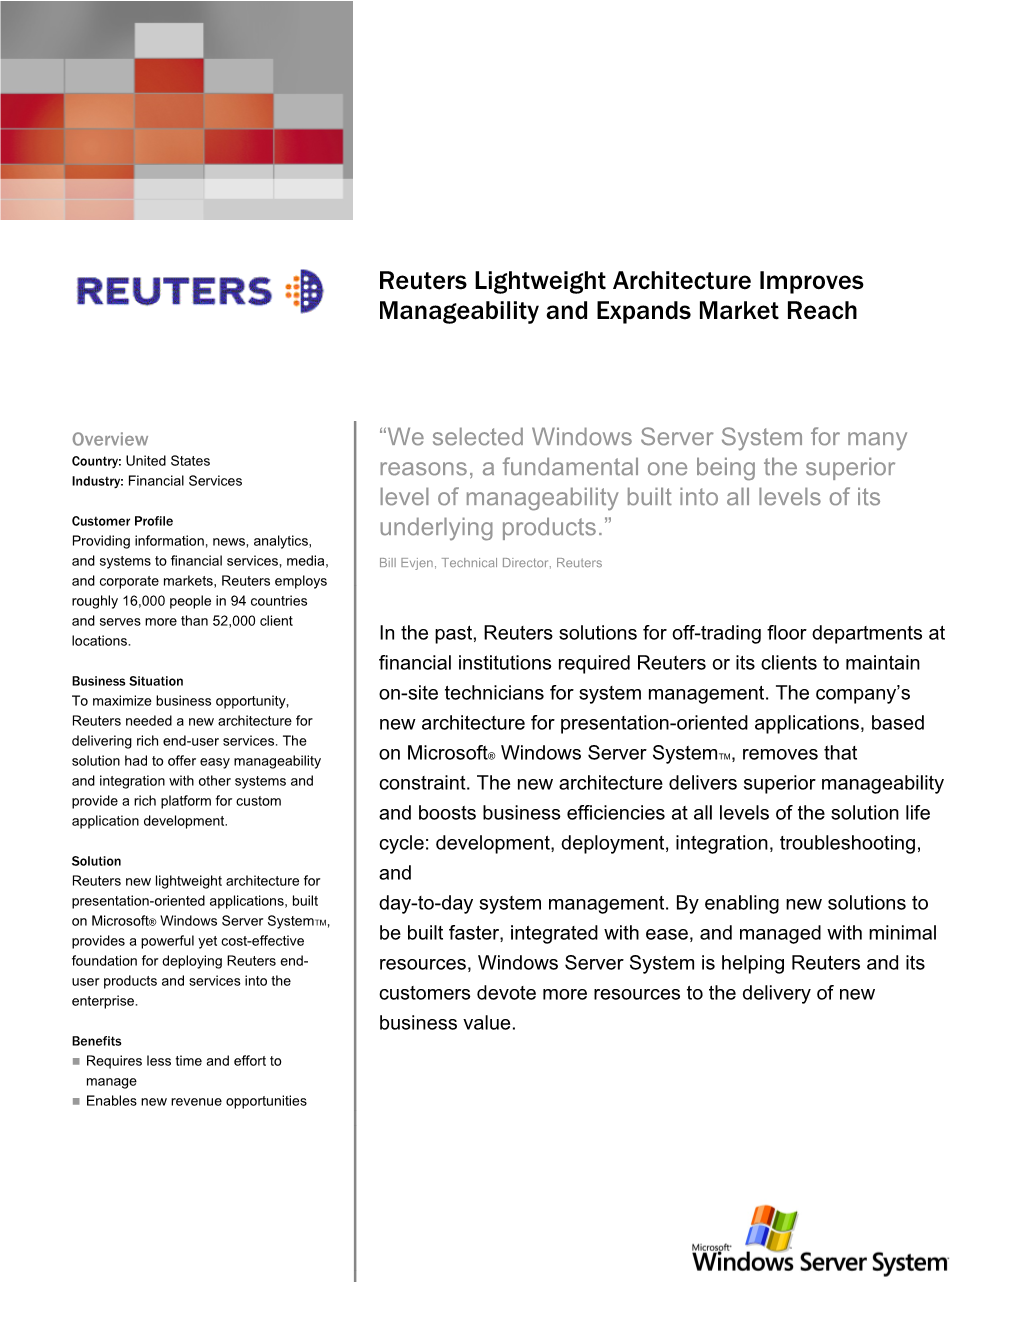 Reuters' New Product Delivery Architecture Improves Manageability and Expands Revenue